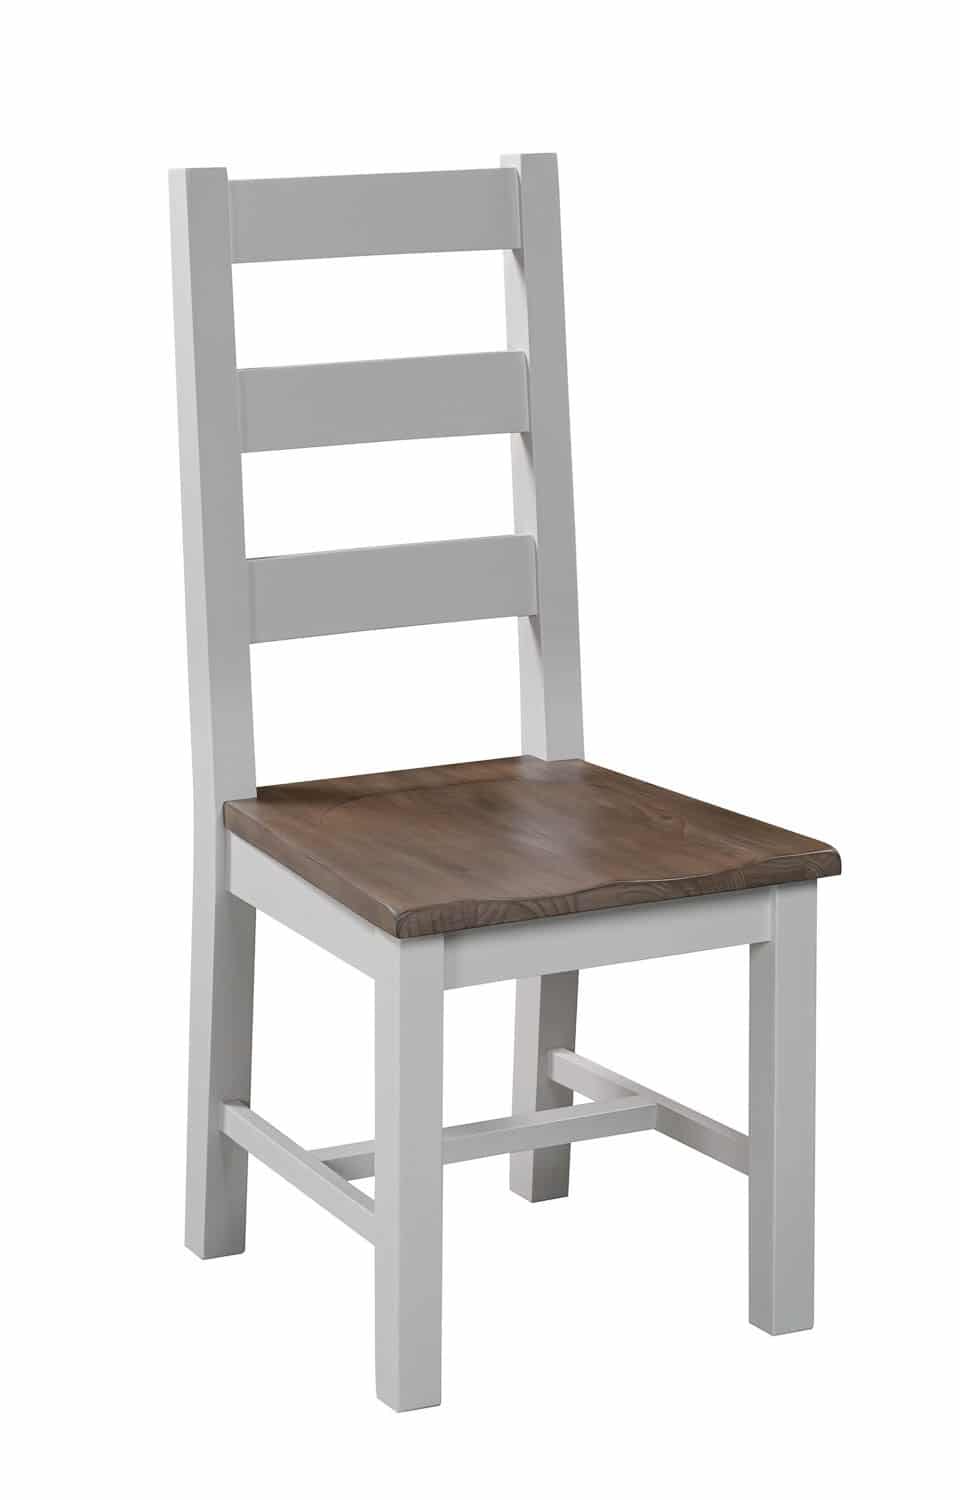 The Hampton Collection Dining Chair